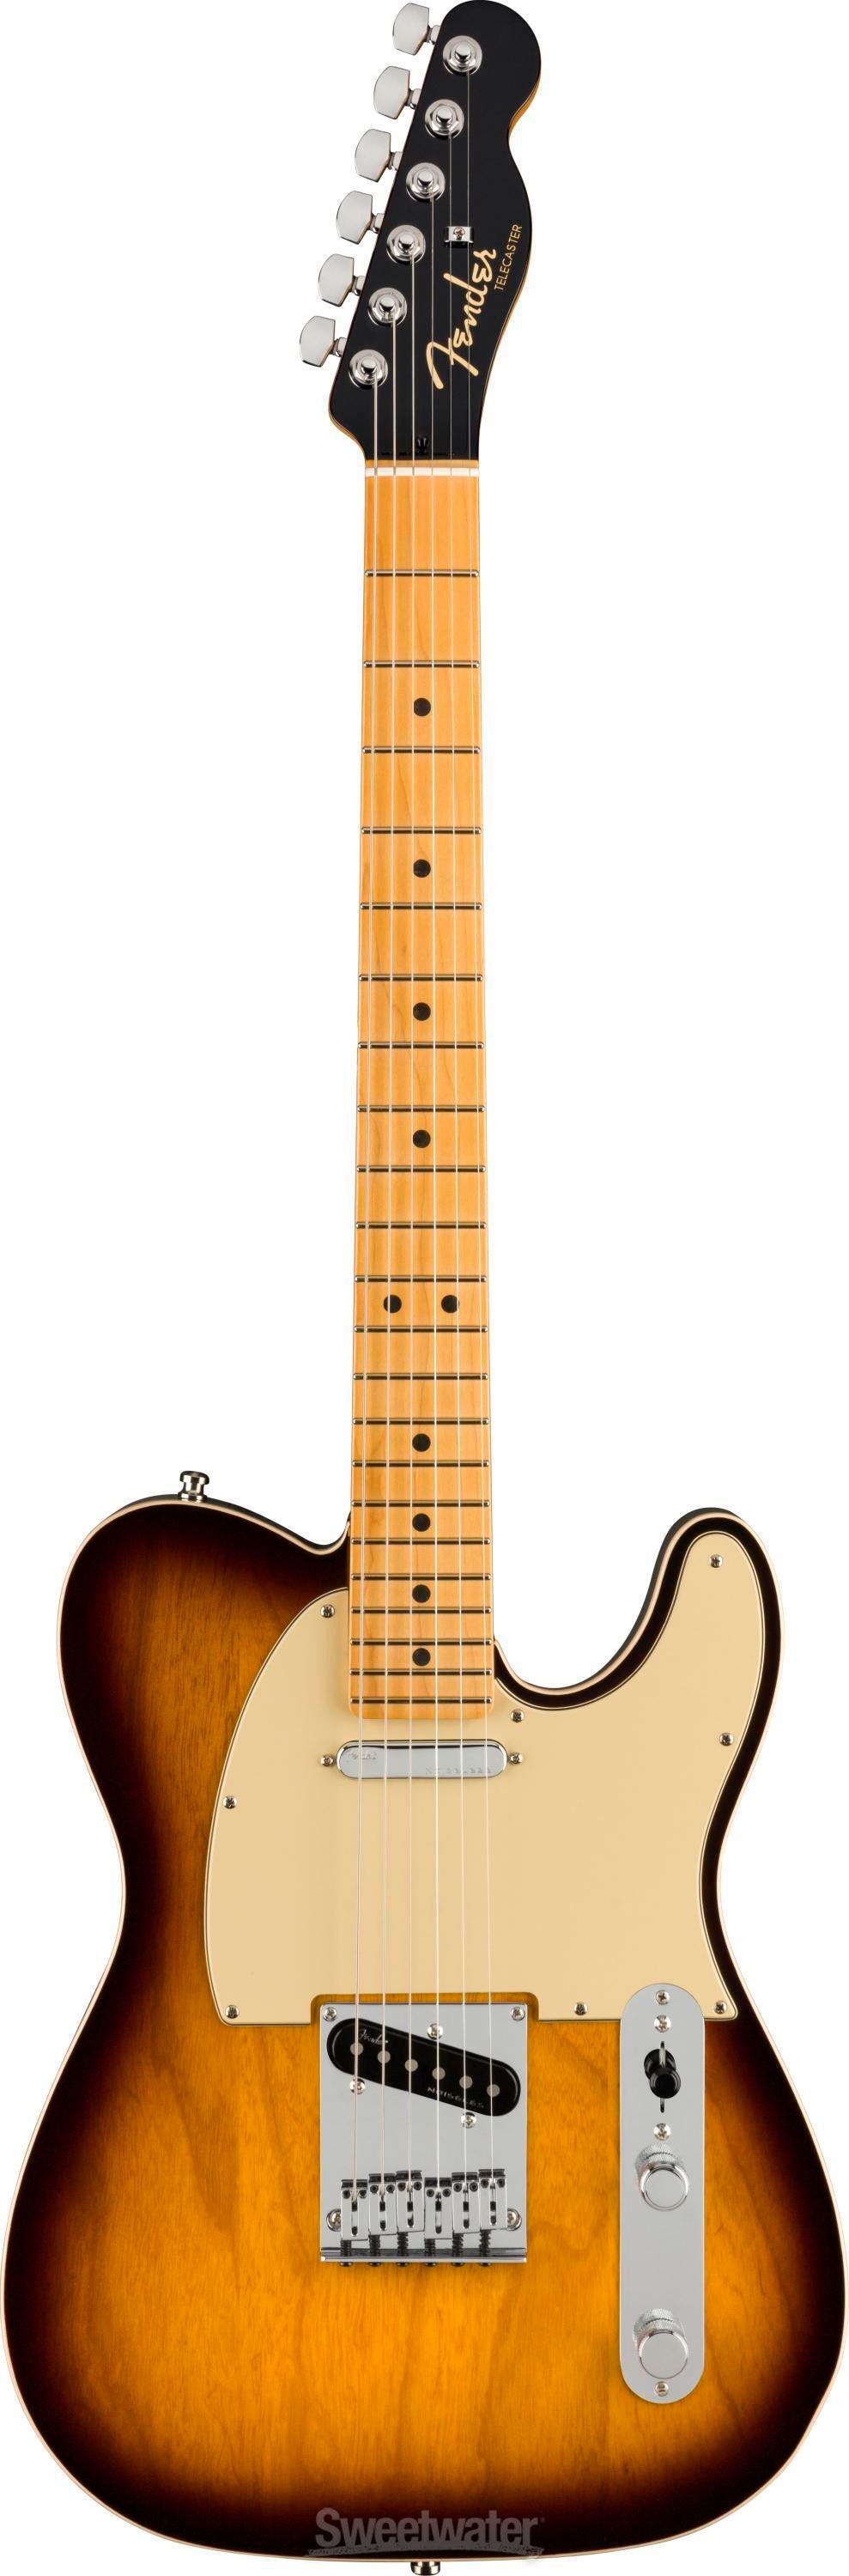 Fender American Ultra Luxe Telecaster - 2-color Sunburst with 